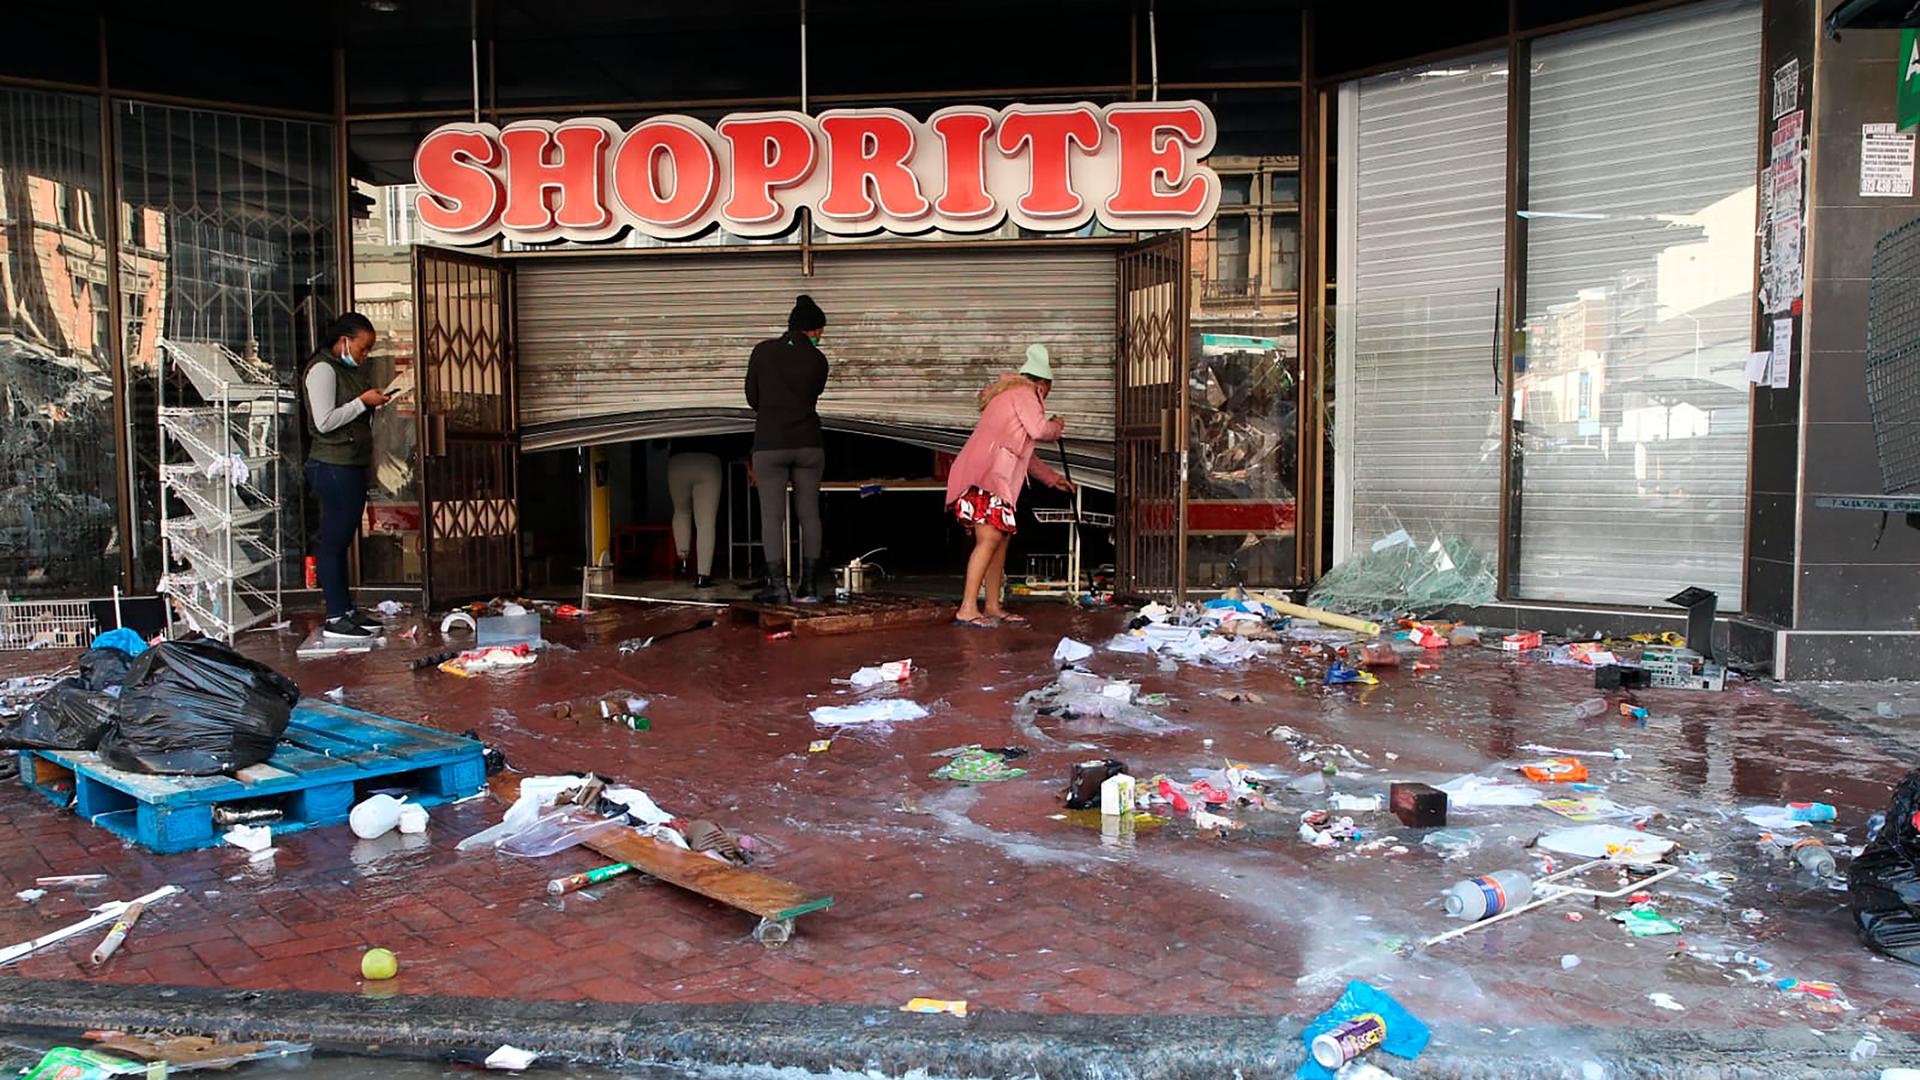 South Africa Zuma Riots - The trashed entrance to a supermarket in Durban South Africa, Thursday, July 15, 2021, as unrest continues in the KwaZulu Natal province. South Africa's army has begun deploying 25,000 troops to assist police in quelling weeklong riots and violence sparked by the imprisonment of former President Jacob Zuma. (AP Photo)